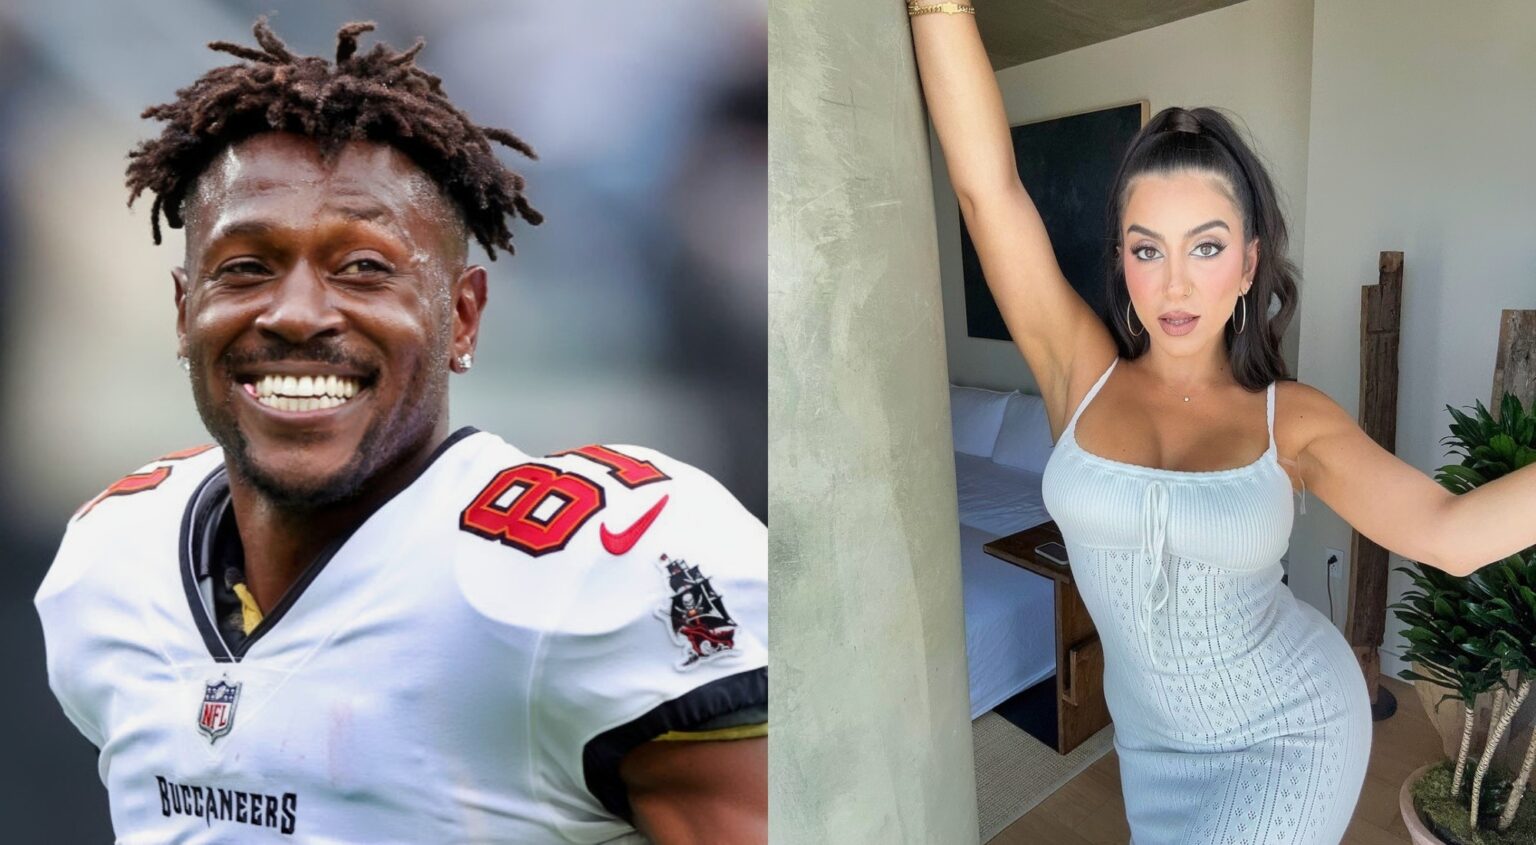 Antonio Brown Wants To Have Relations With Adam22's Wife